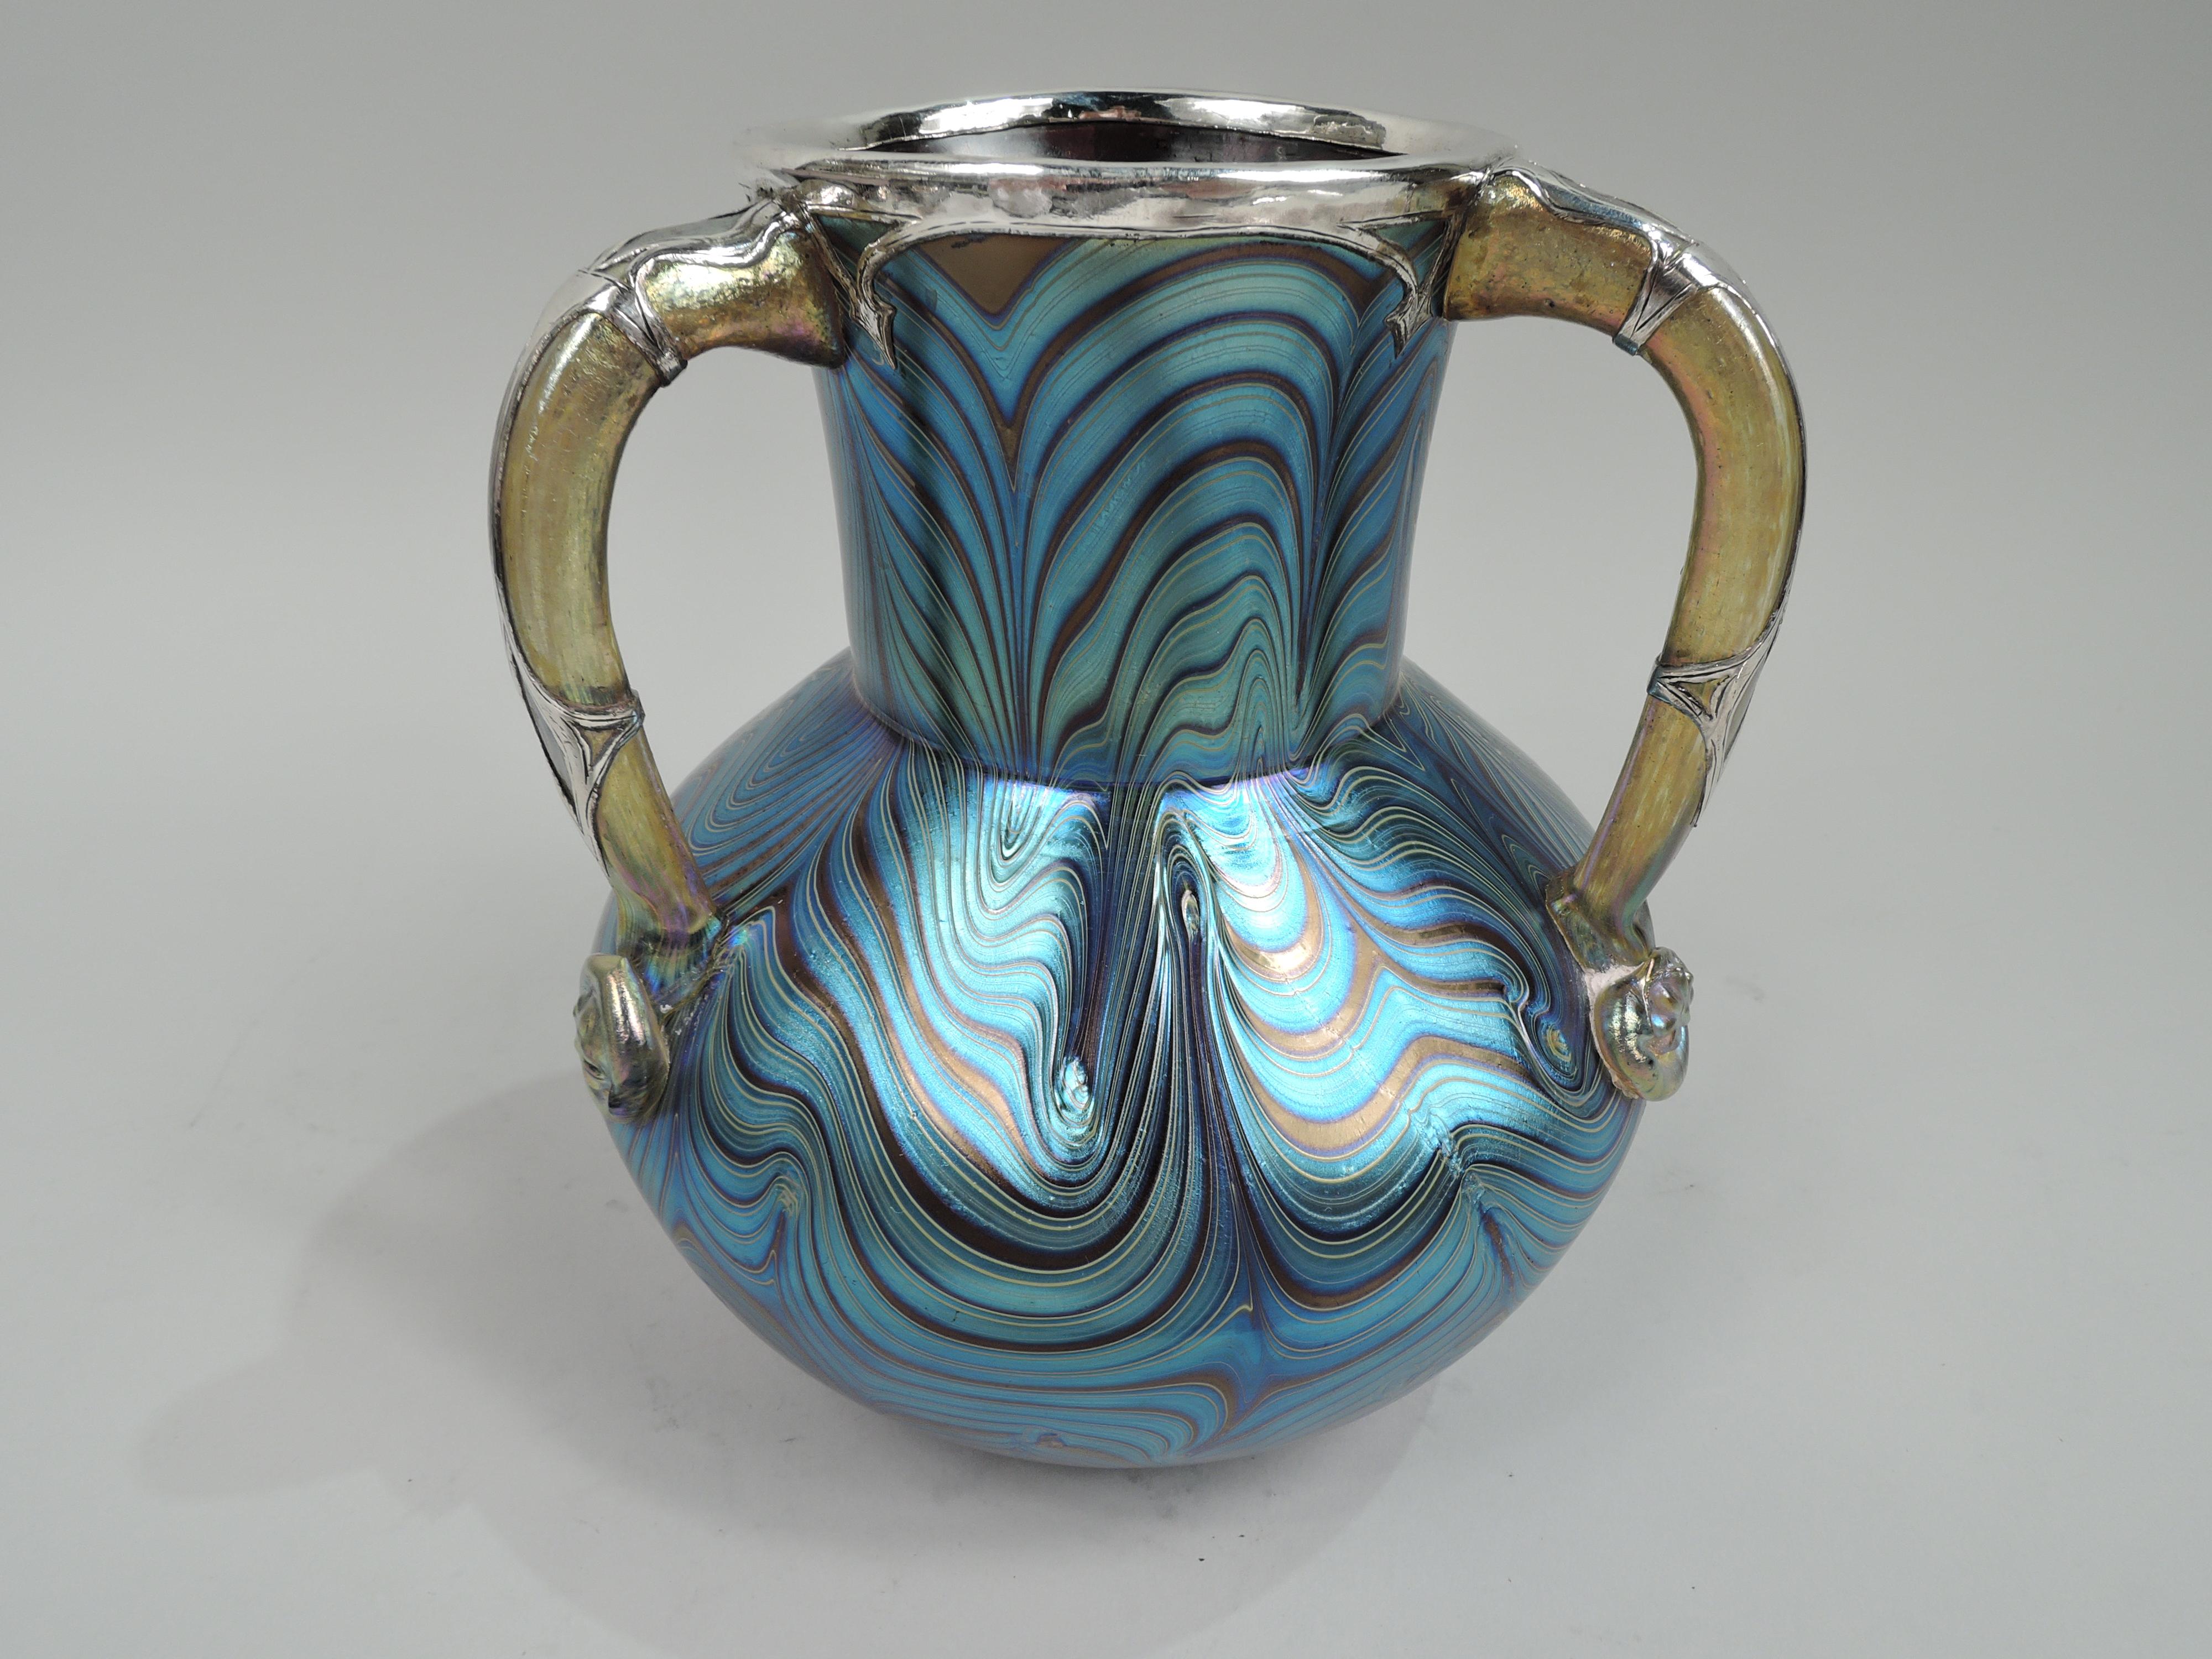 Striking turn-of-the-century Art Nouveau glass vase by historic Loetz with silver overlay. Globular with drum neck and wavy irregular pattern in iridescent blue heightened with purple and yellow. Interior red. Three gilt scroll handles with patera